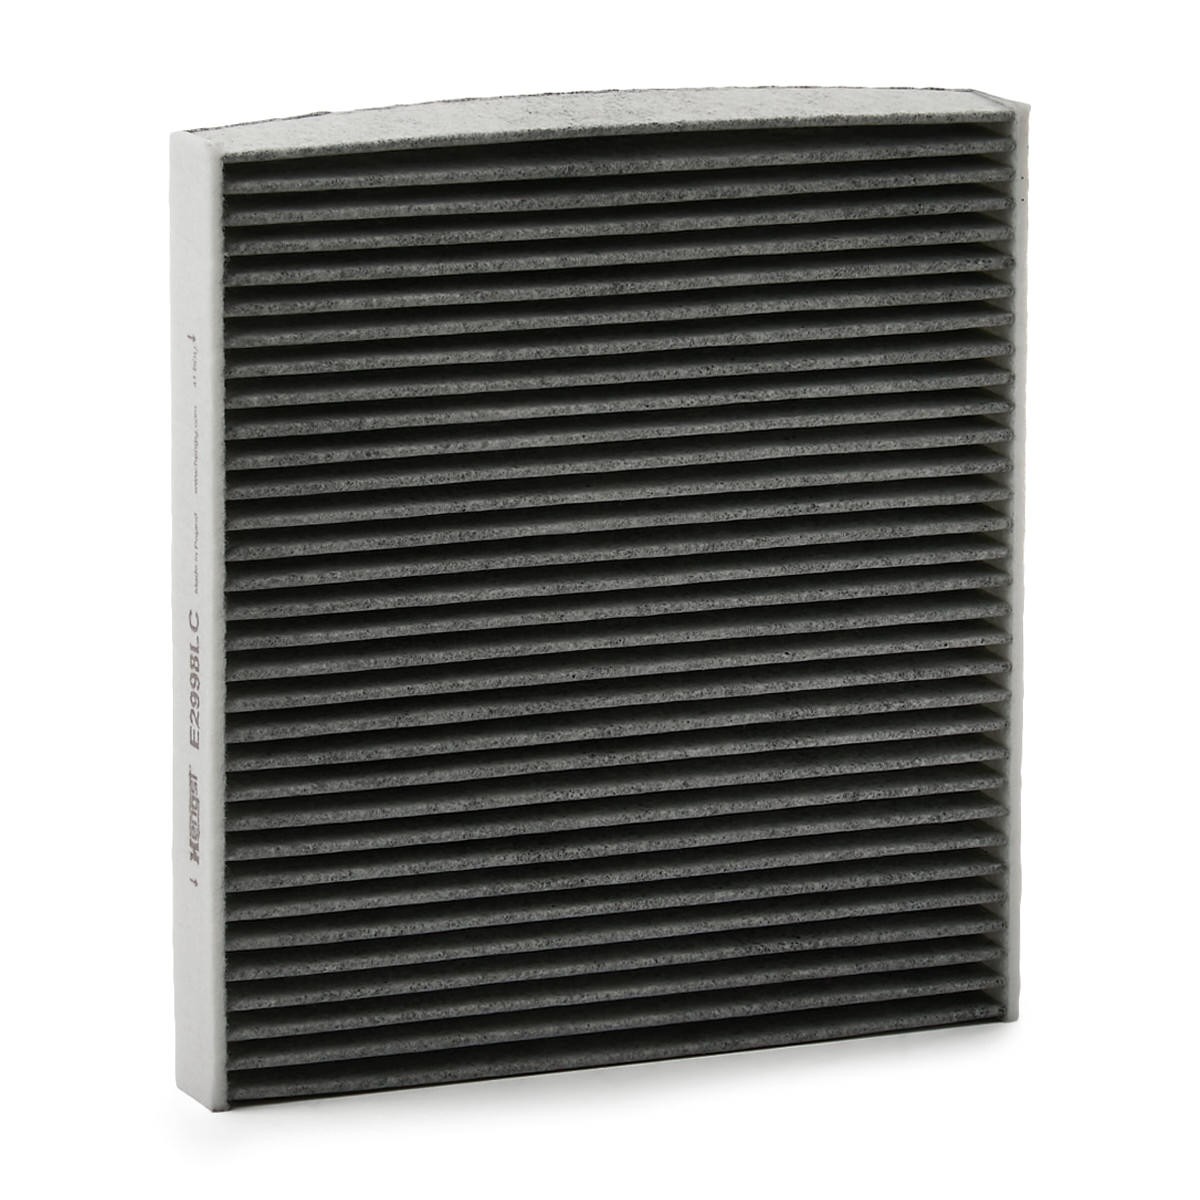 6720310000 HENGST FILTER Activated Carbon Filter, 250 mm x 235 mm x 30 mm Width: 235mm, Height: 30mm, Length: 250mm Cabin filter E2998LC buy